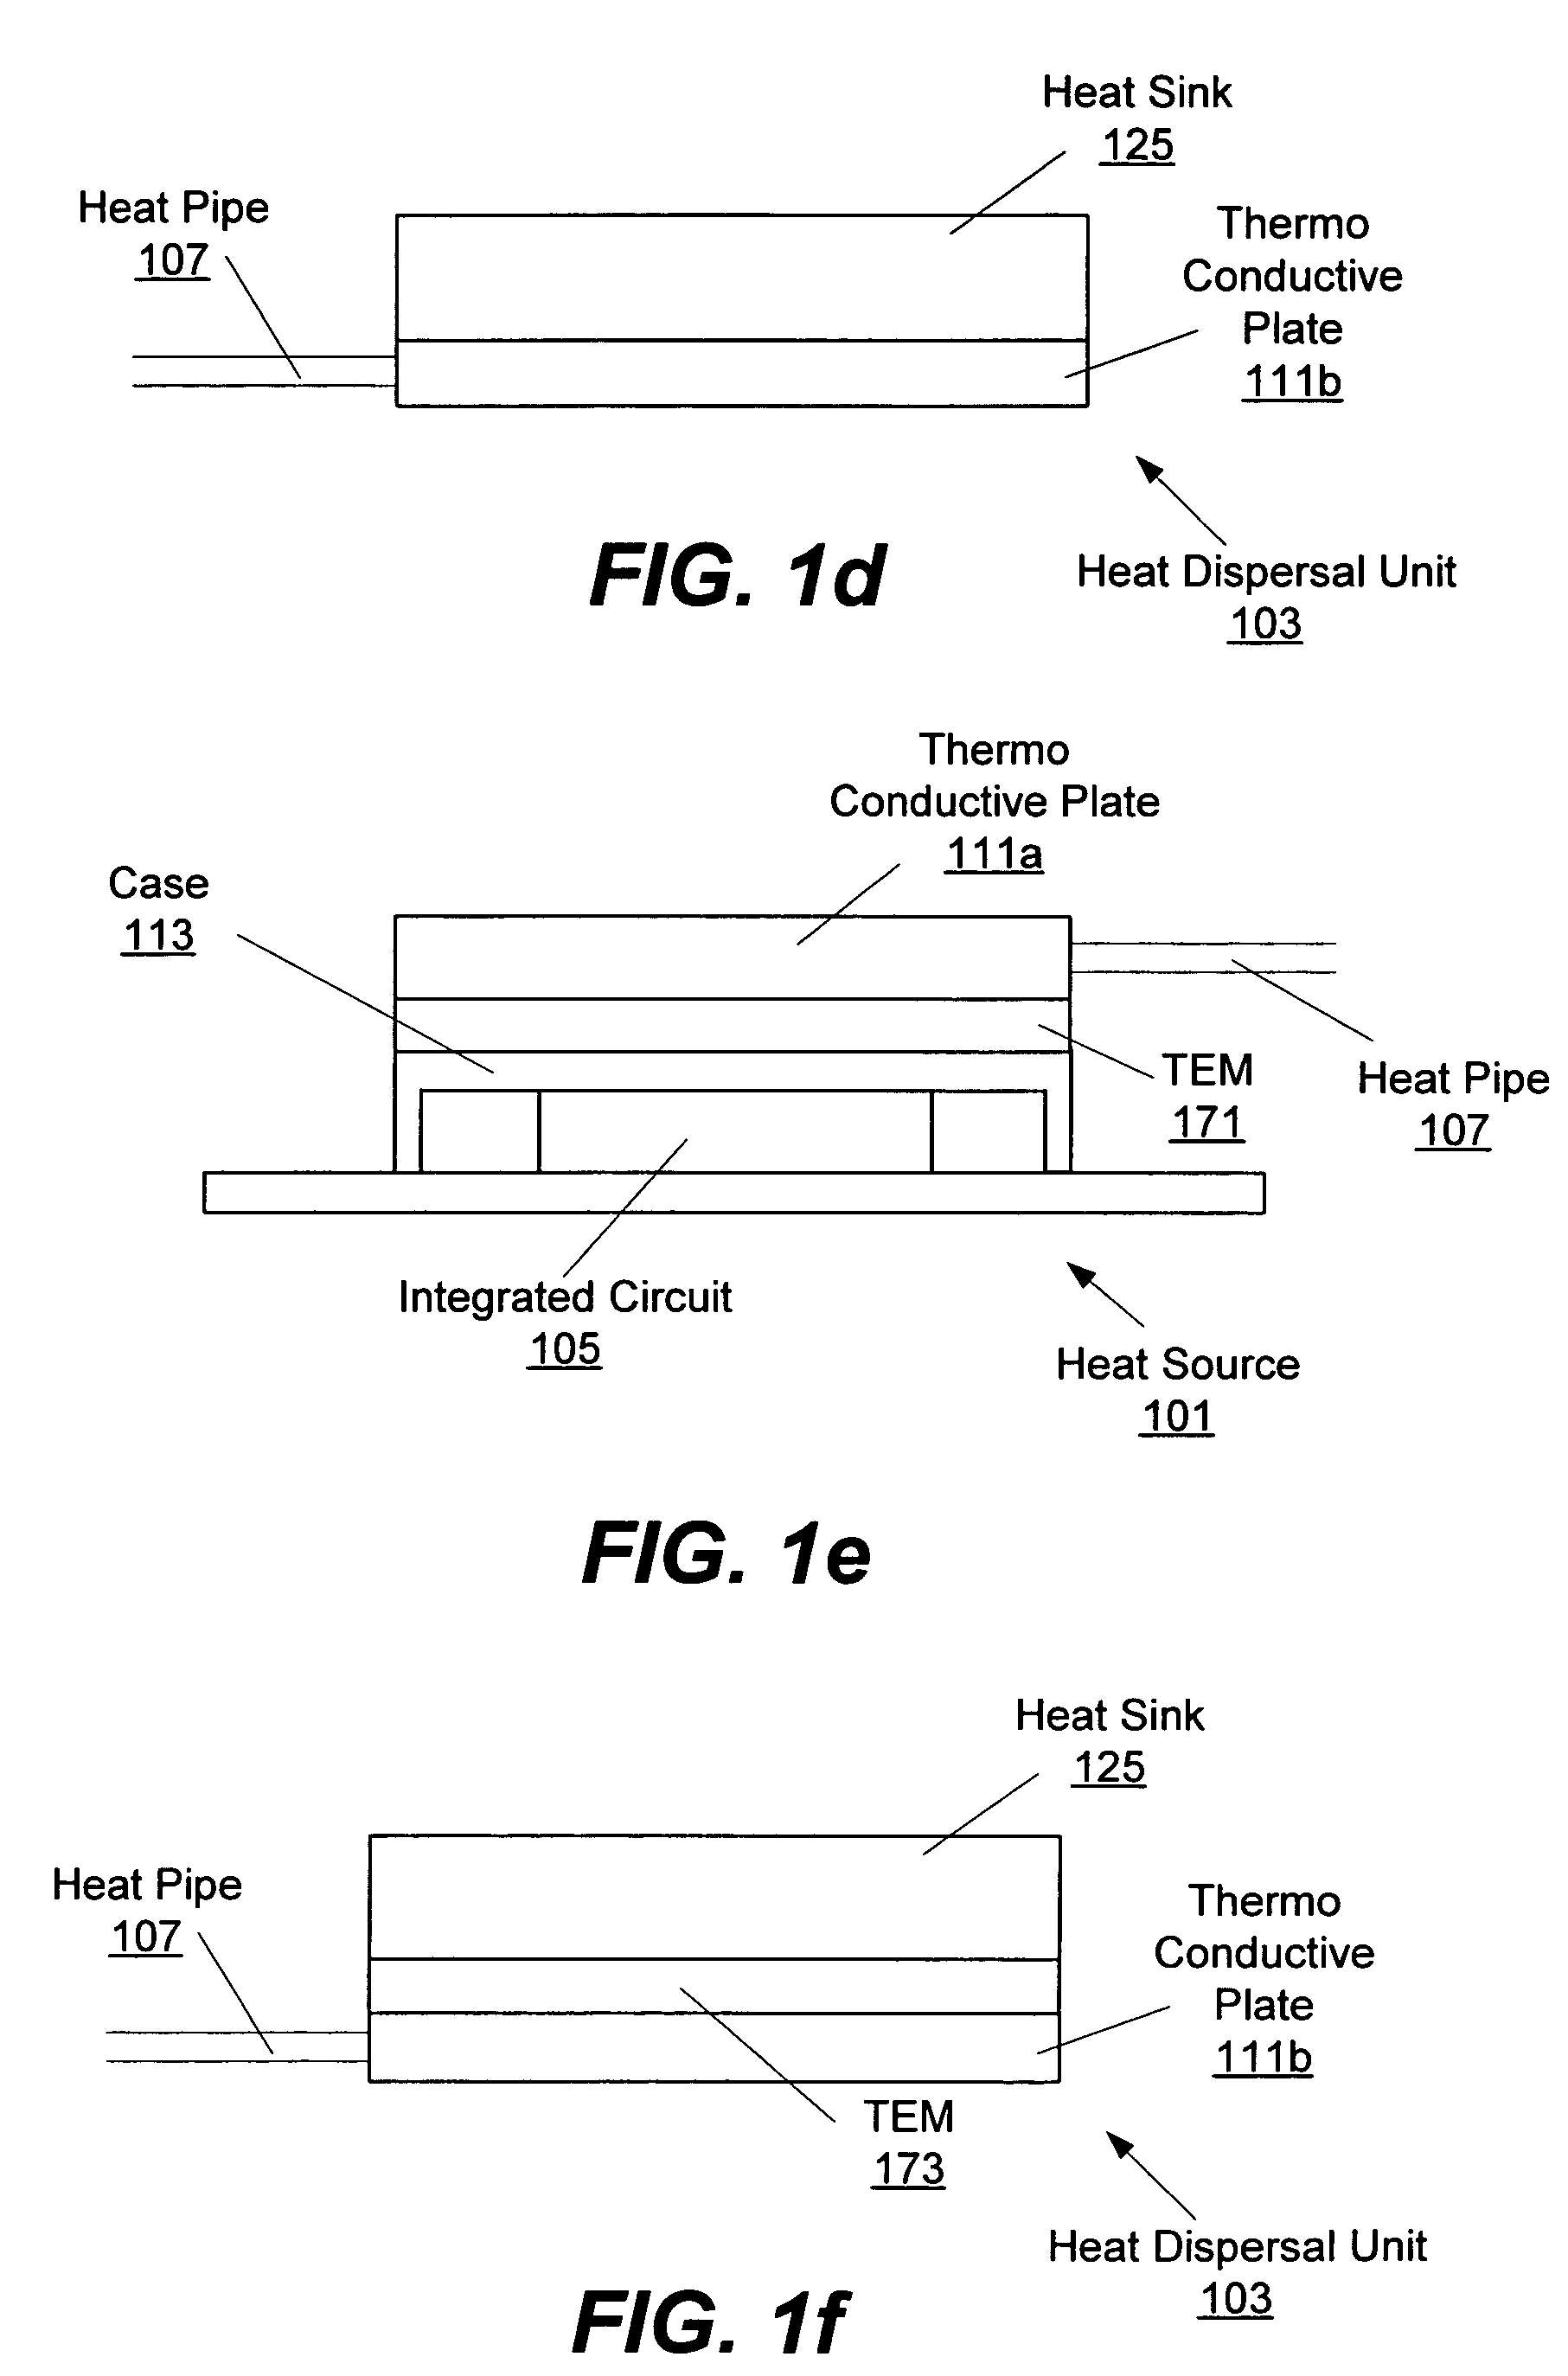 Integrated circuit cooling apparatus and method